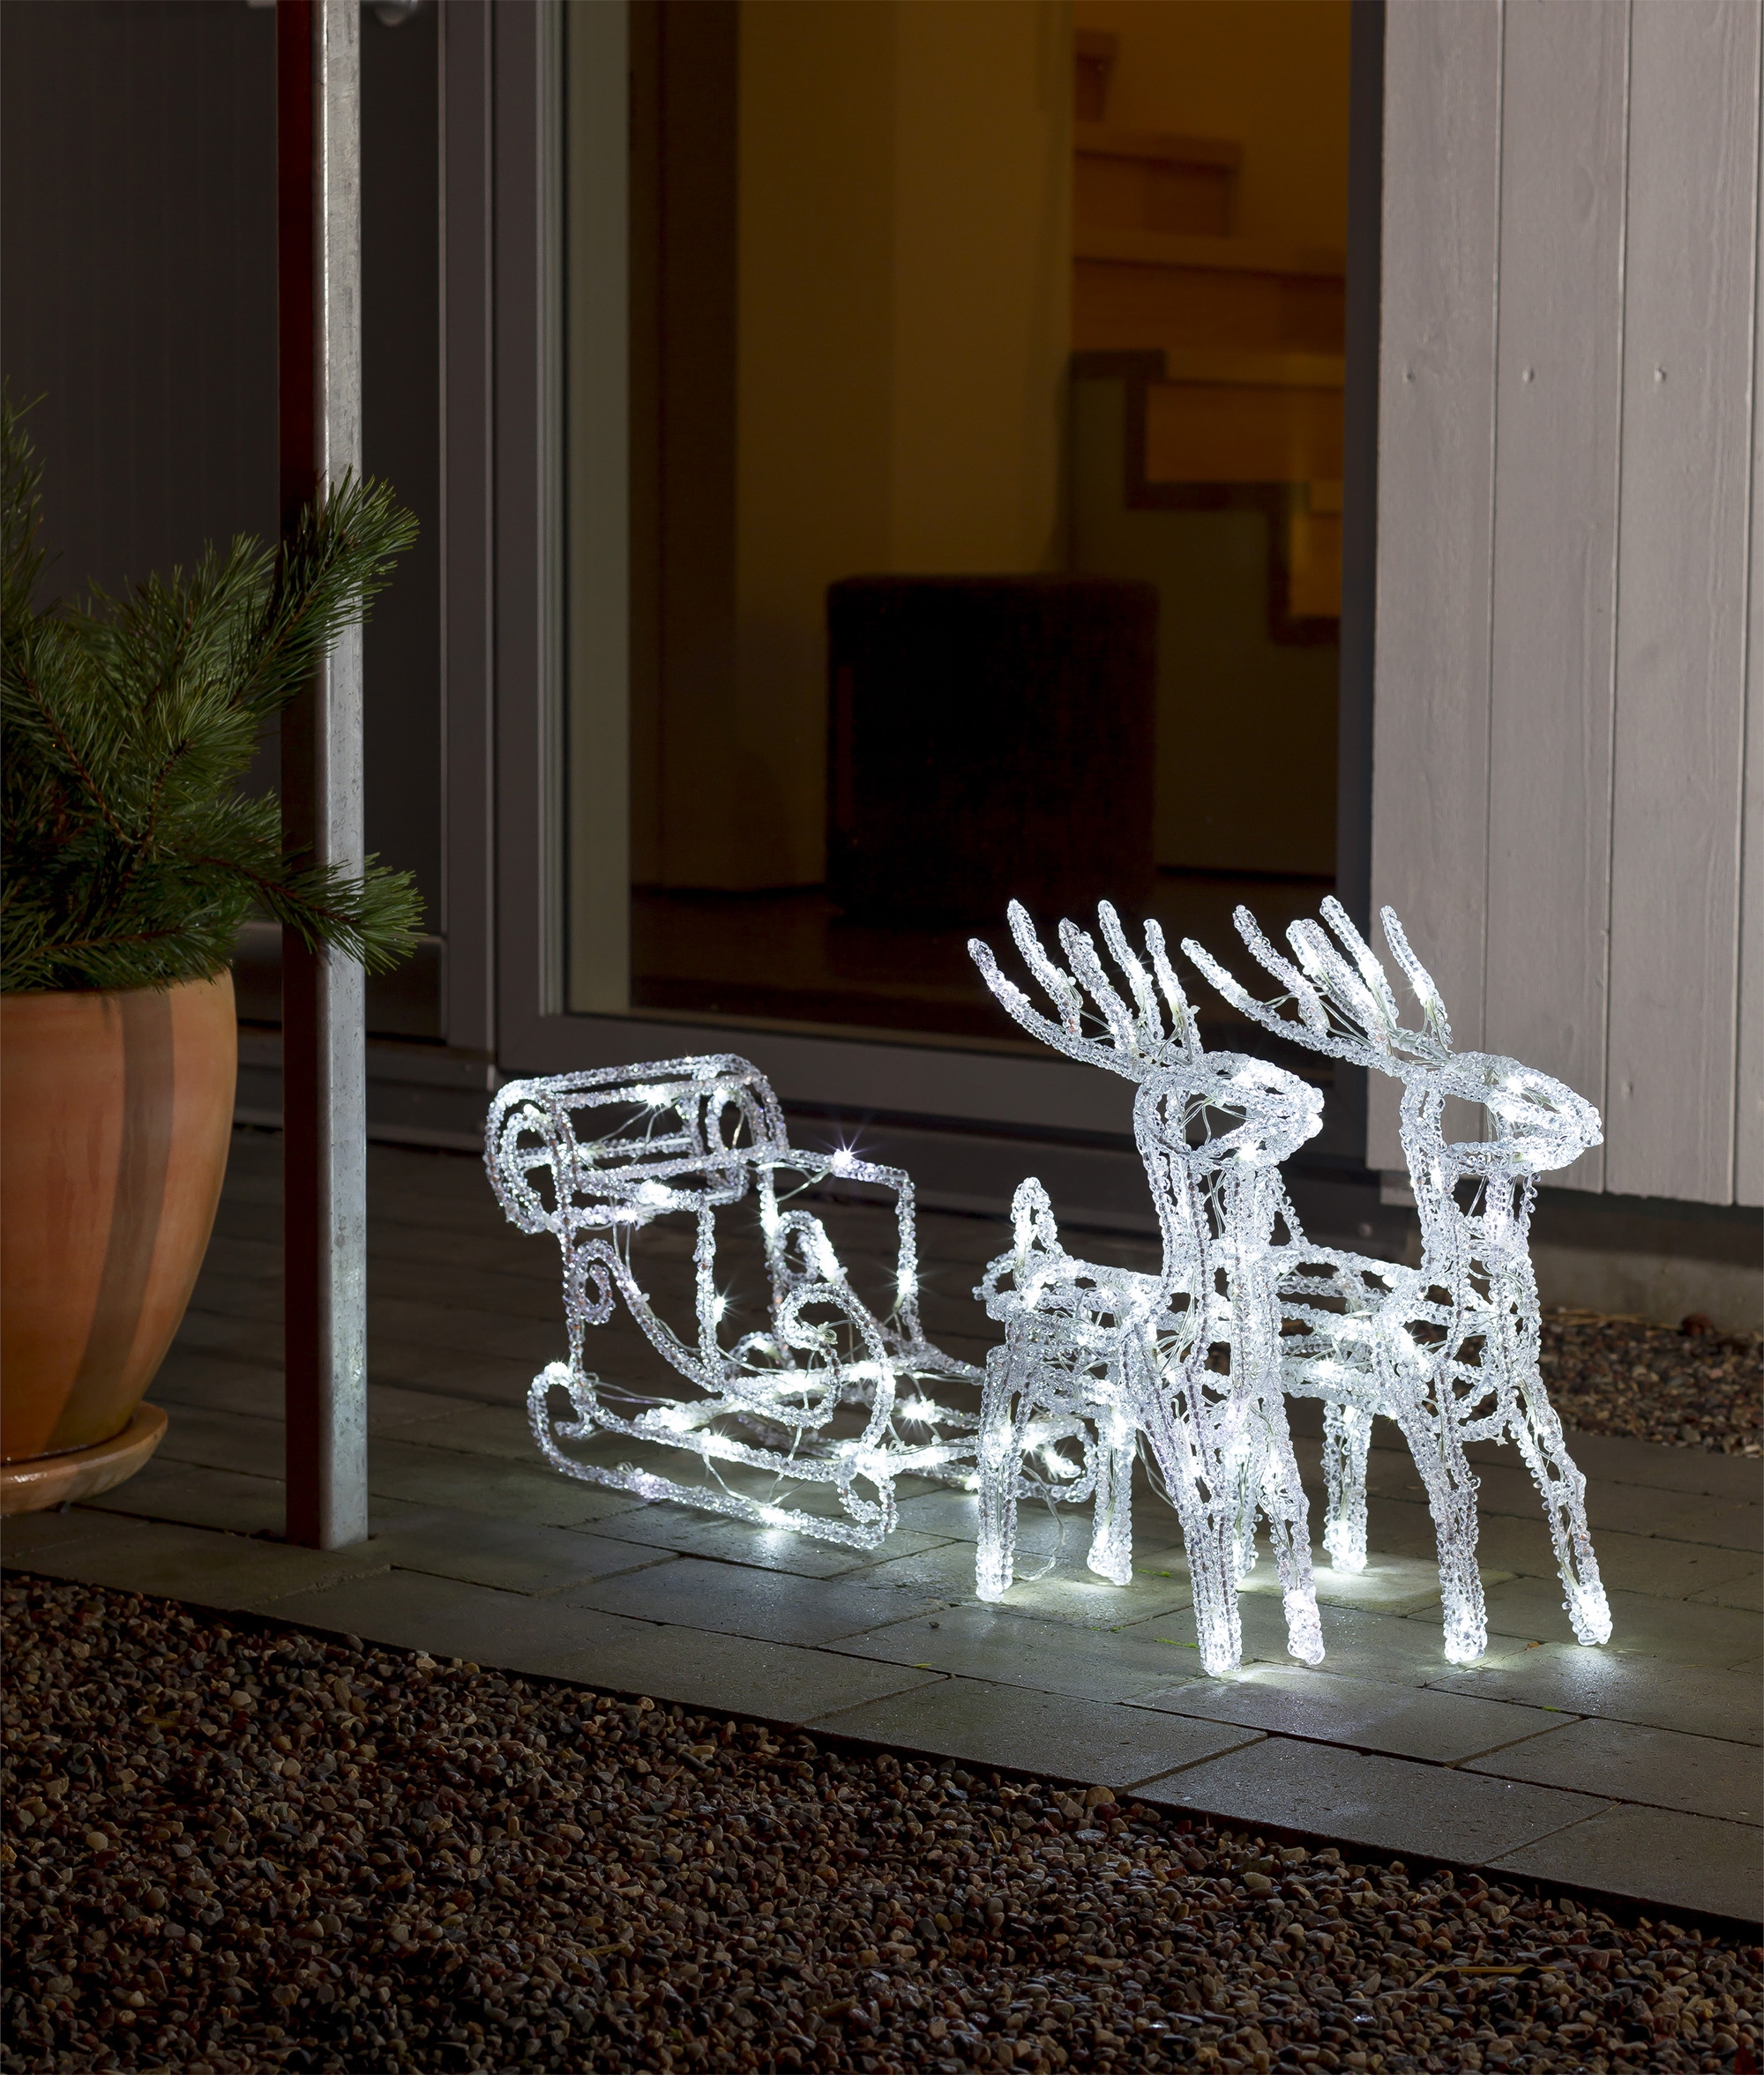 Reindeers With Sleigh Leds For Outdoor Use, Outdoor Santa Sleigh And Reindeer Uk